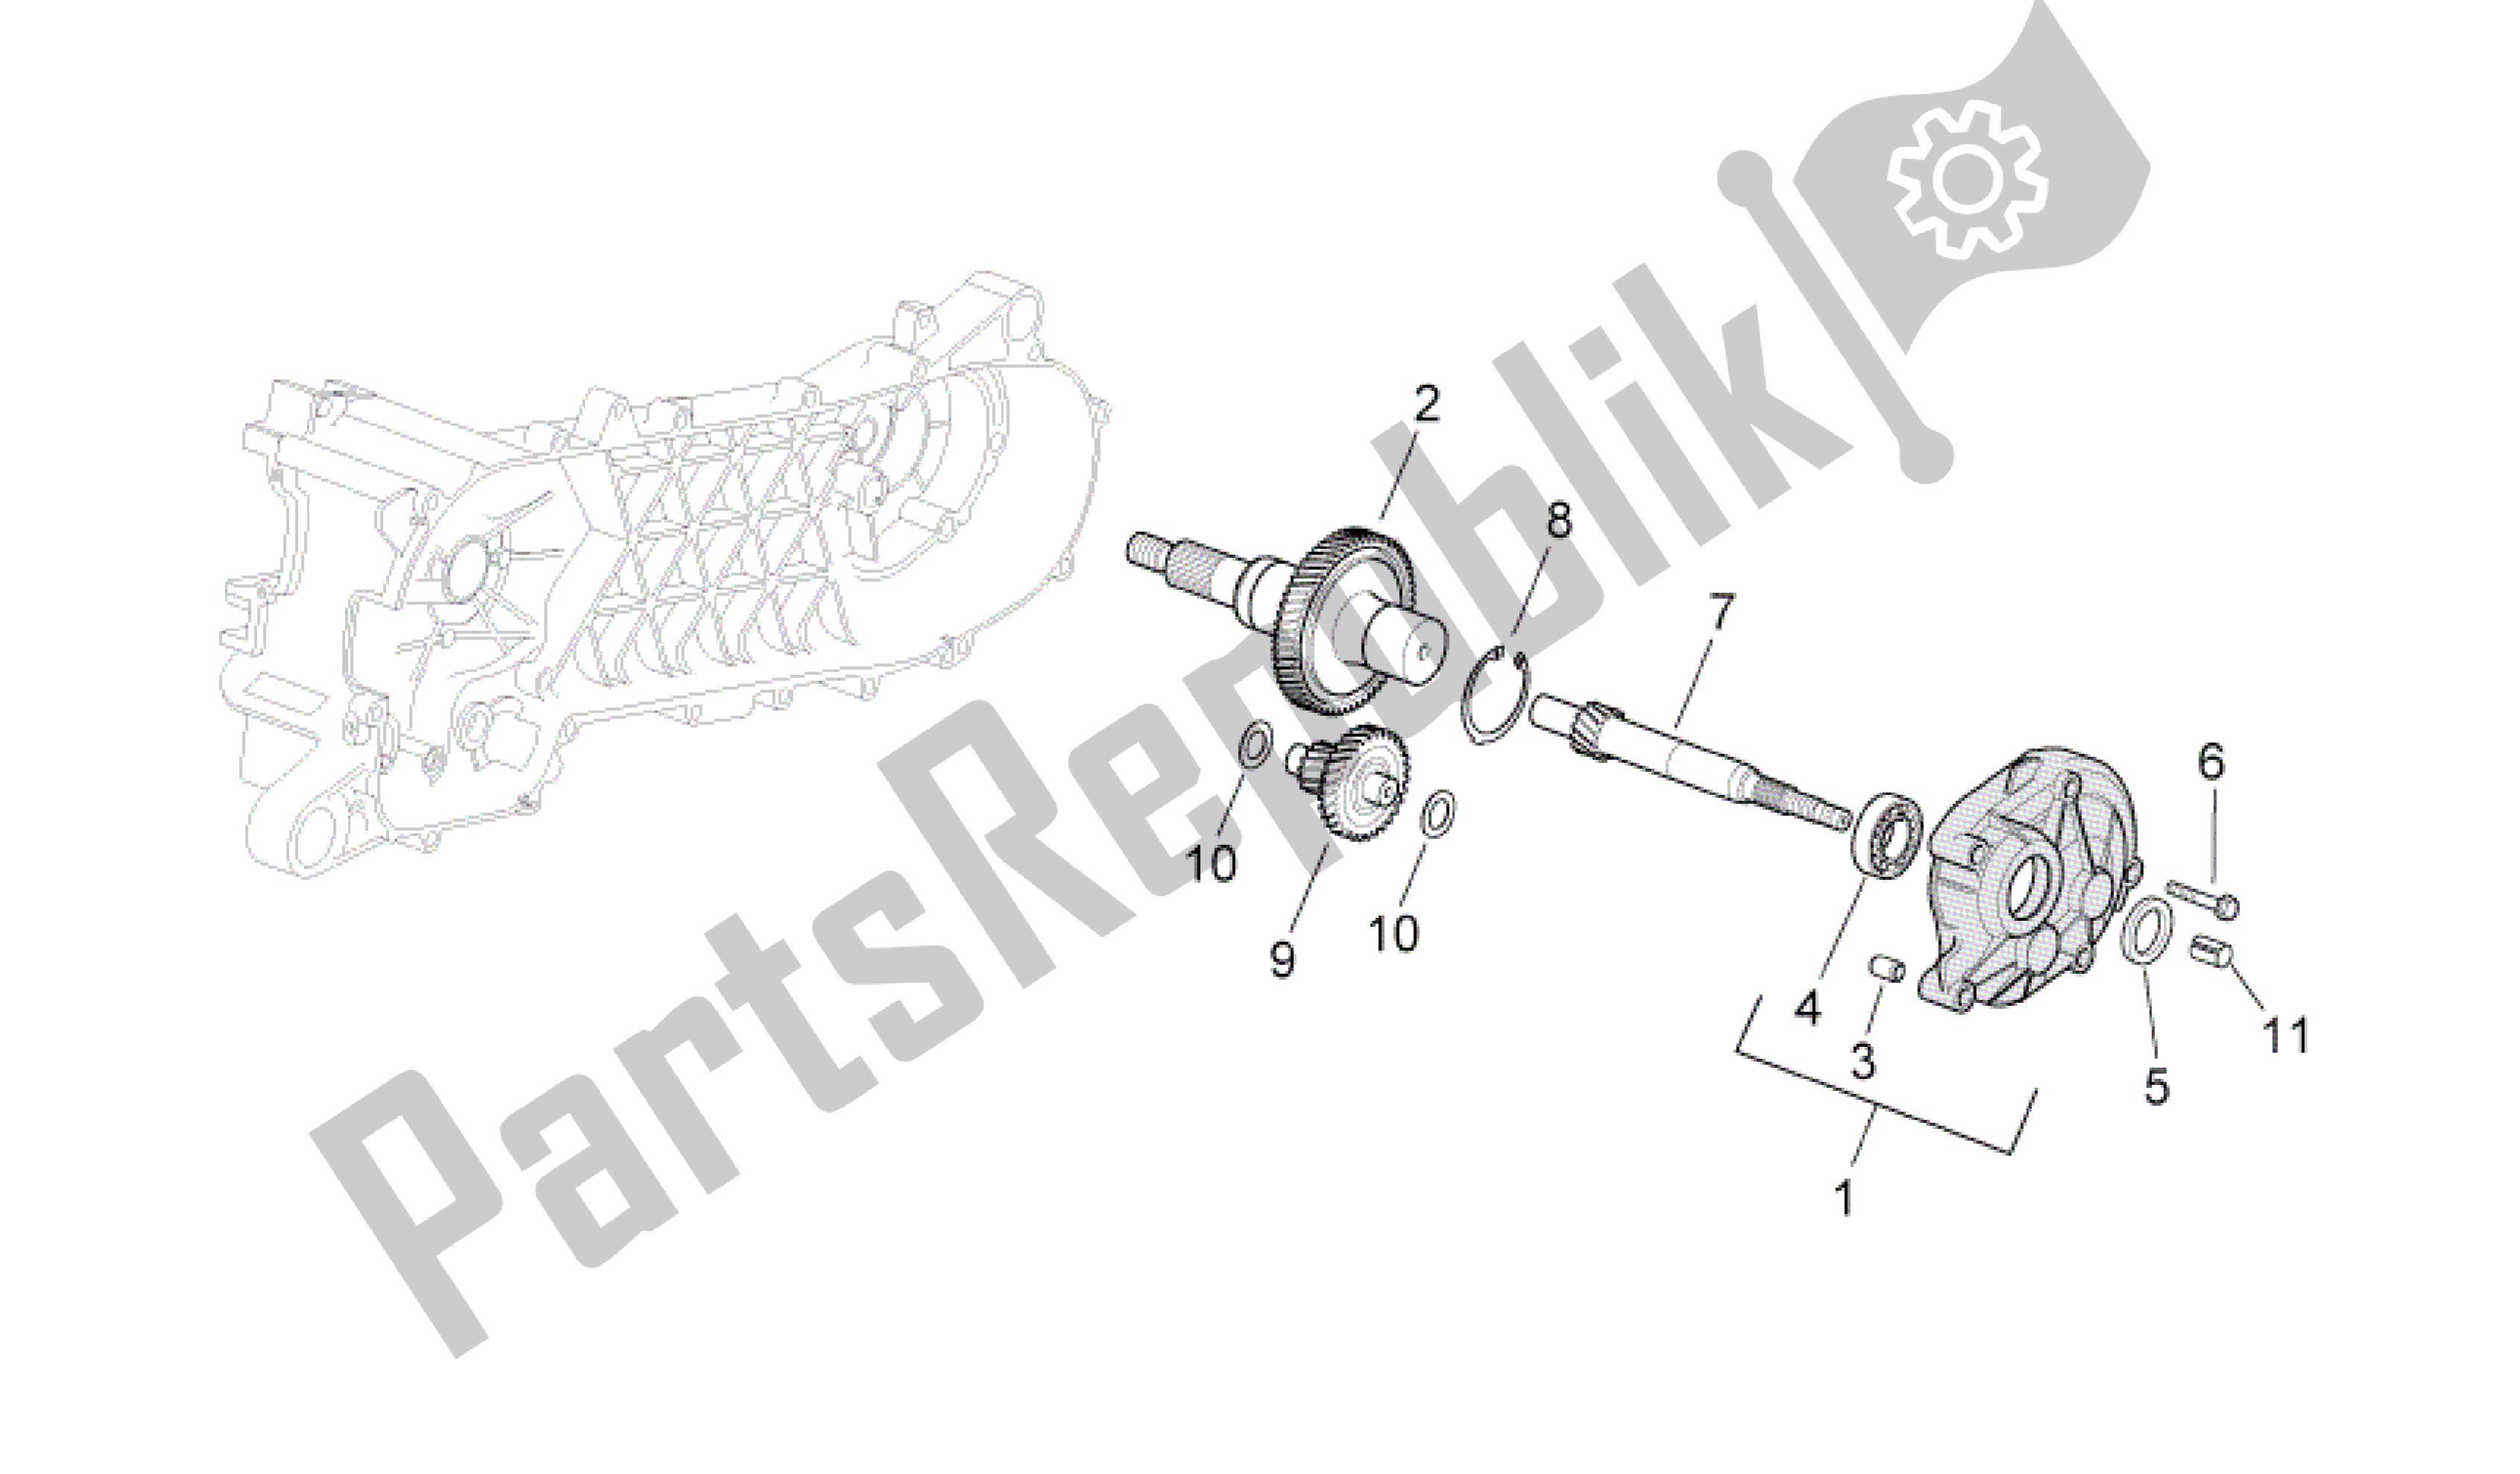 All parts for the Transmission Final Drive of the Aprilia SR 50 2010 - 2014